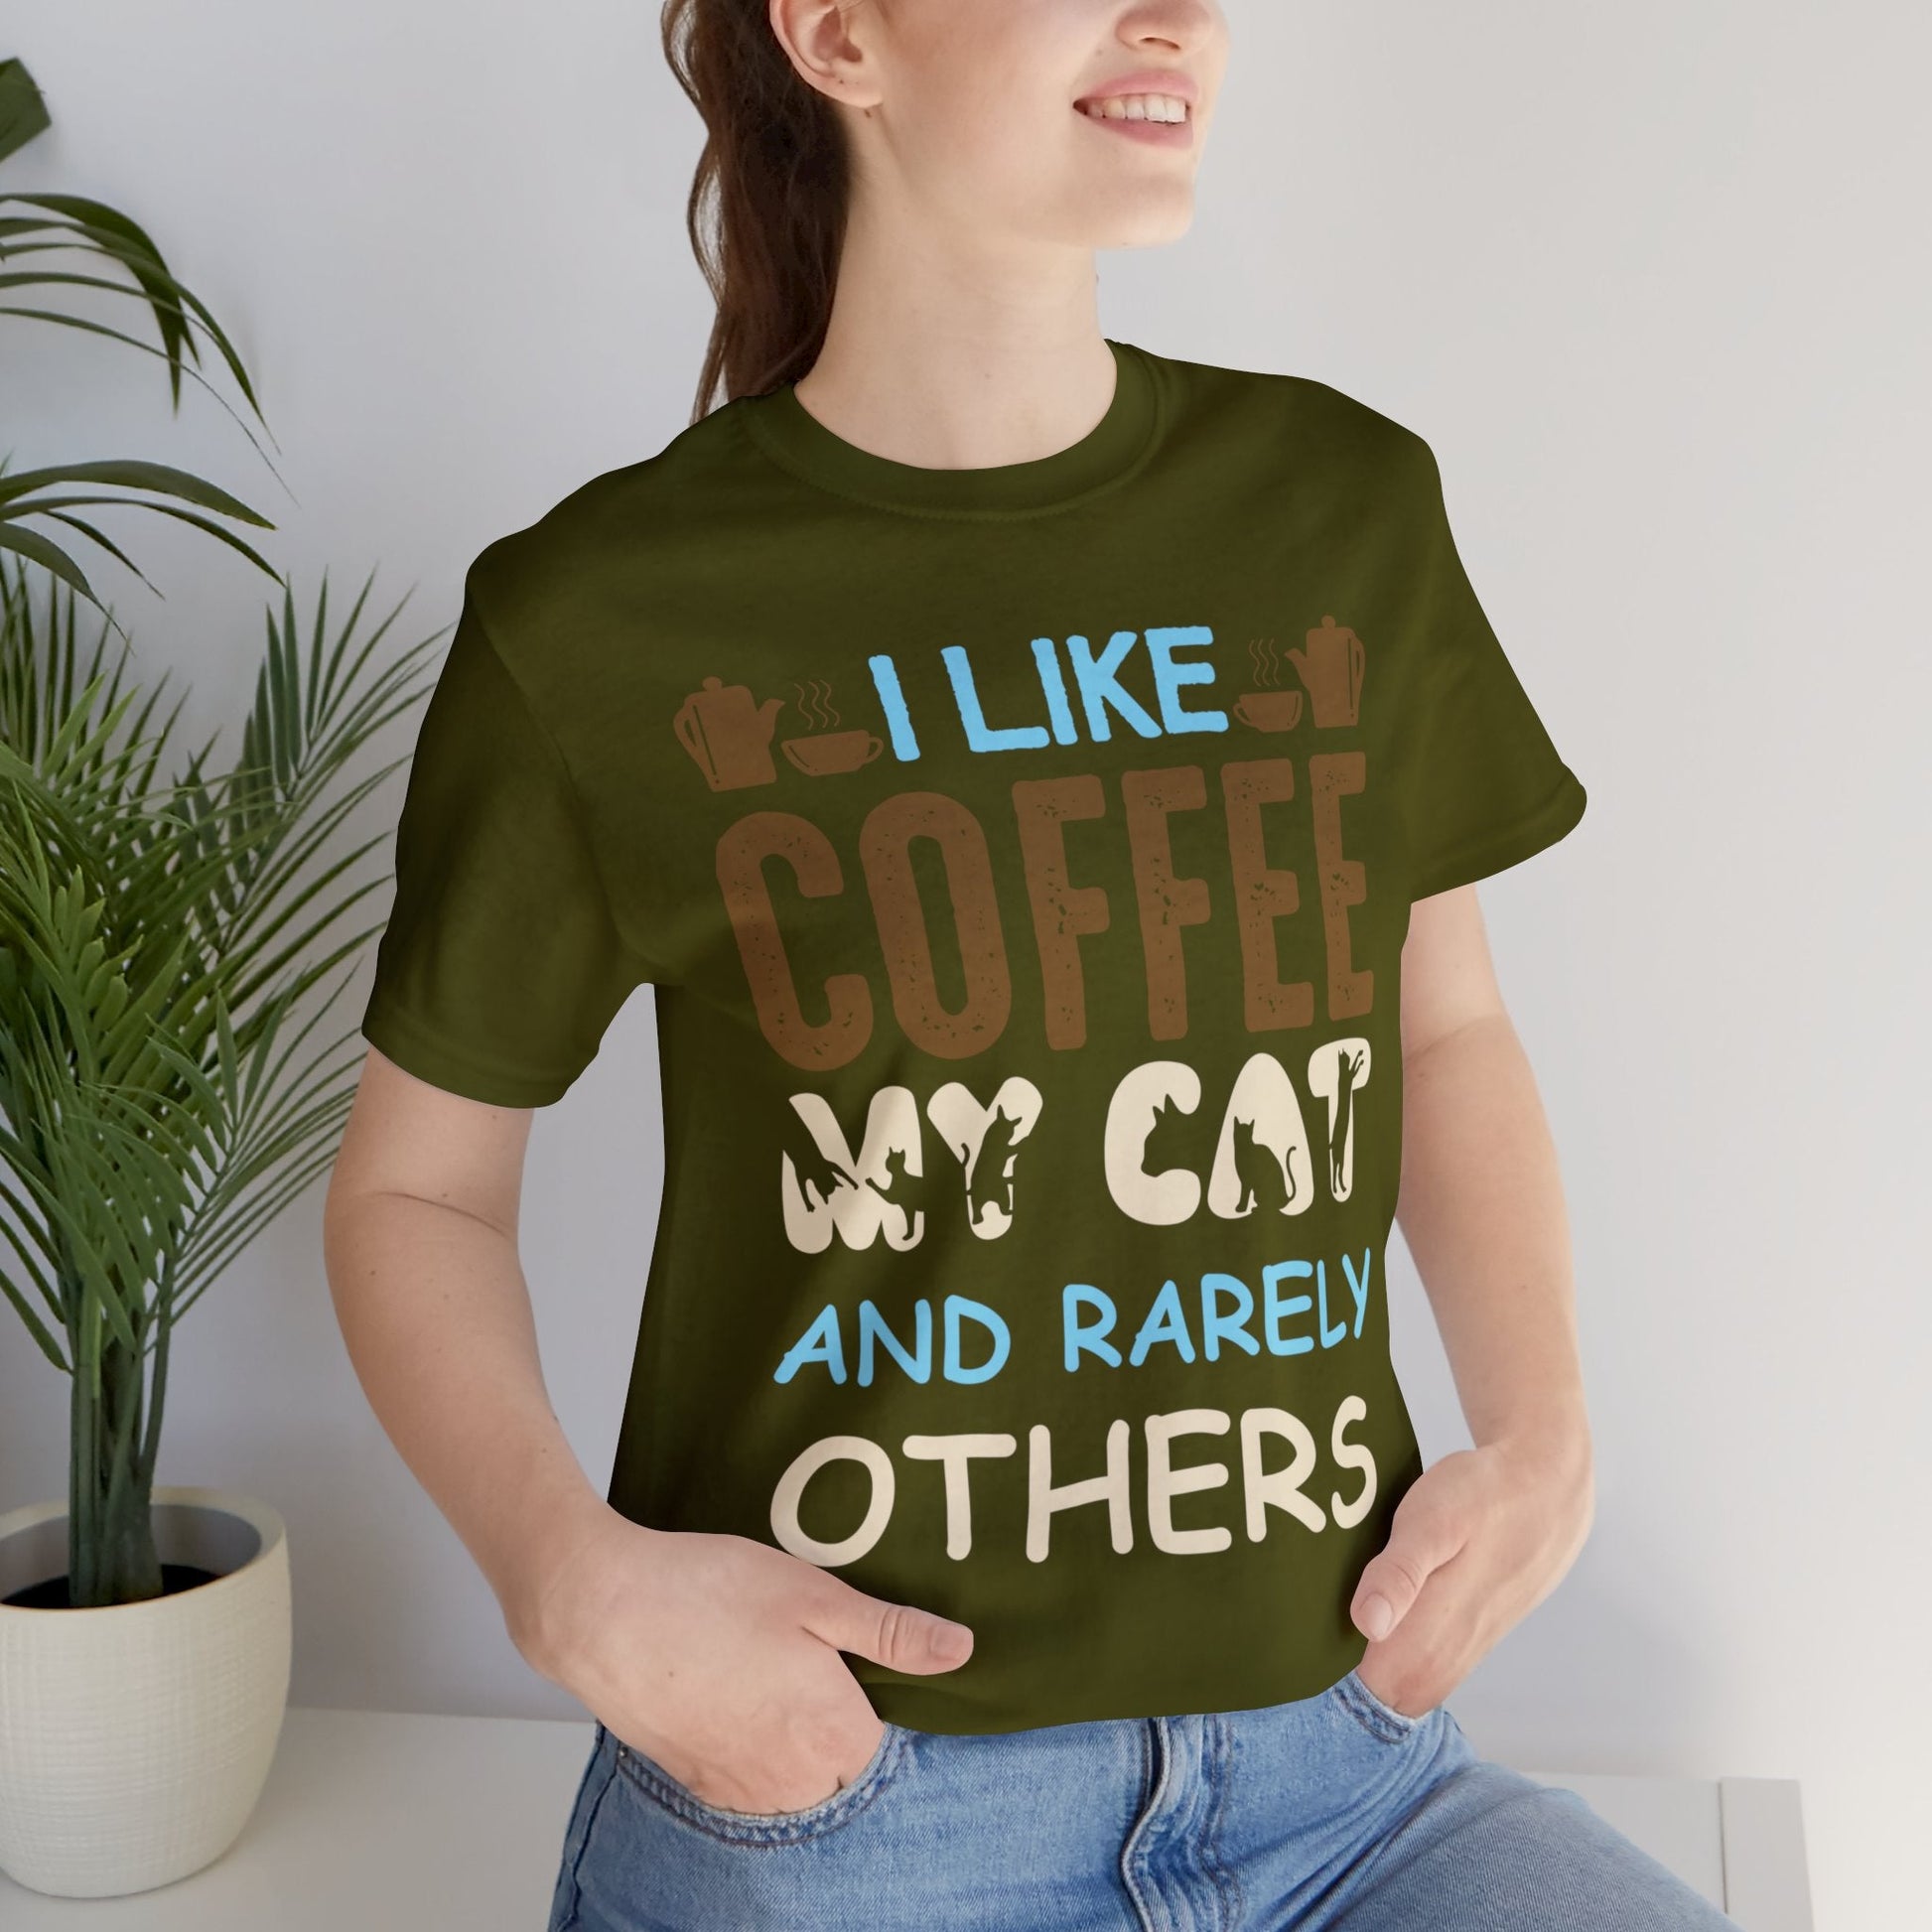 I like coffee my cat and rarely others T-shirt. - InkArt Fashions